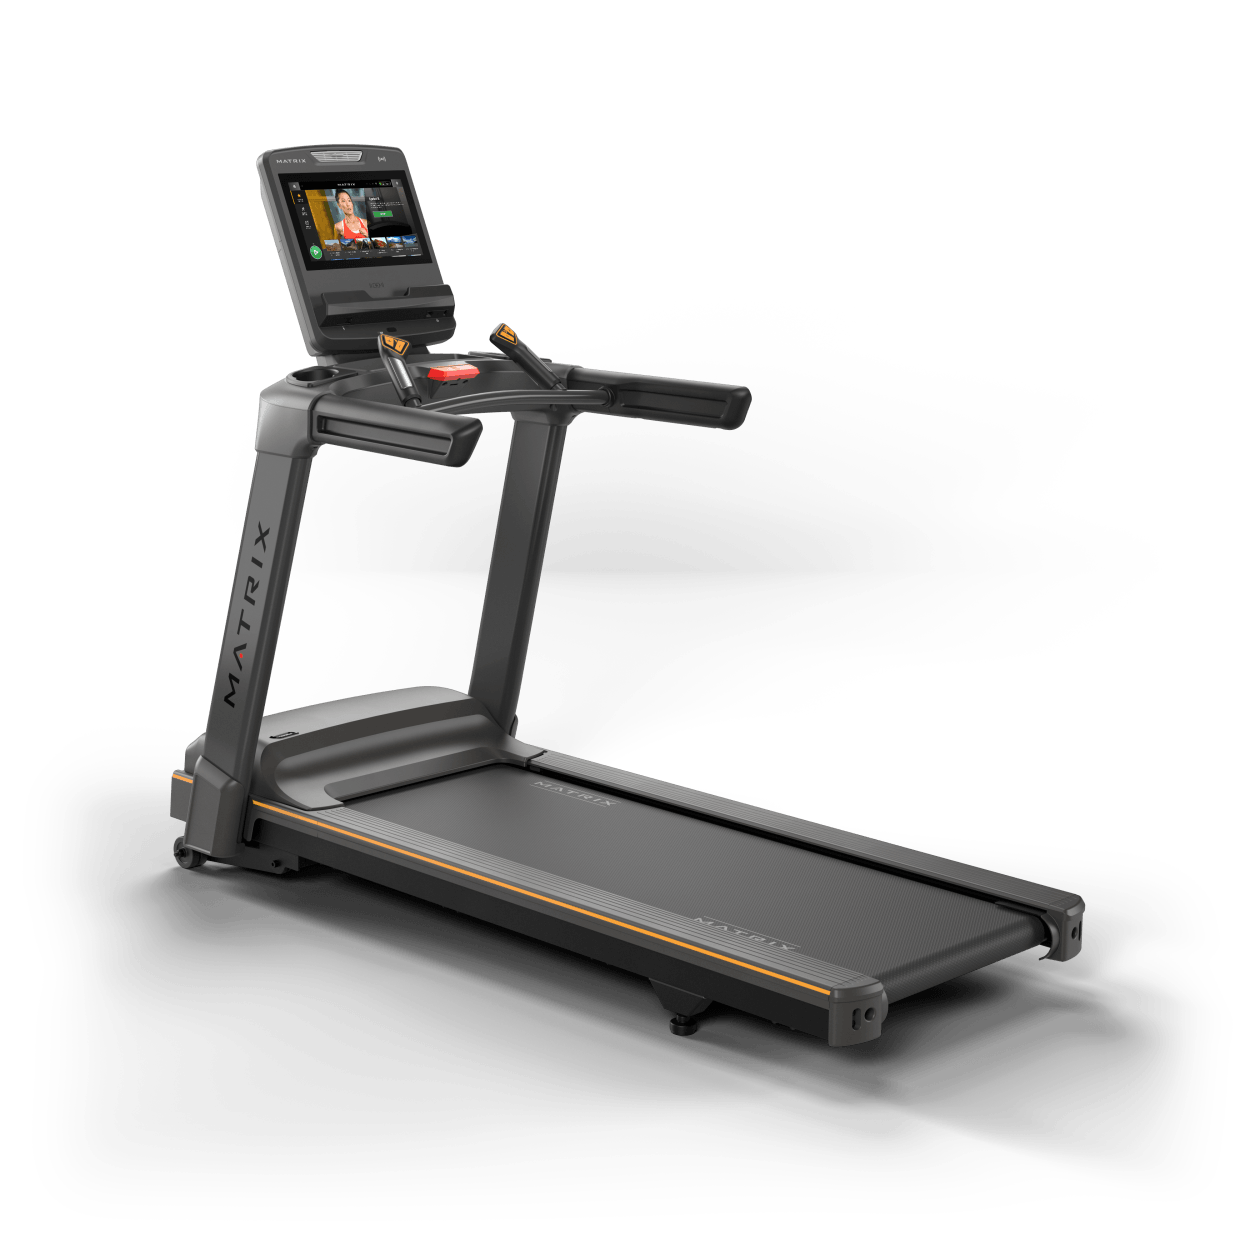 Matrix Fitness Lifestyle Treadmill with Touch Console full view | Fitness Experience